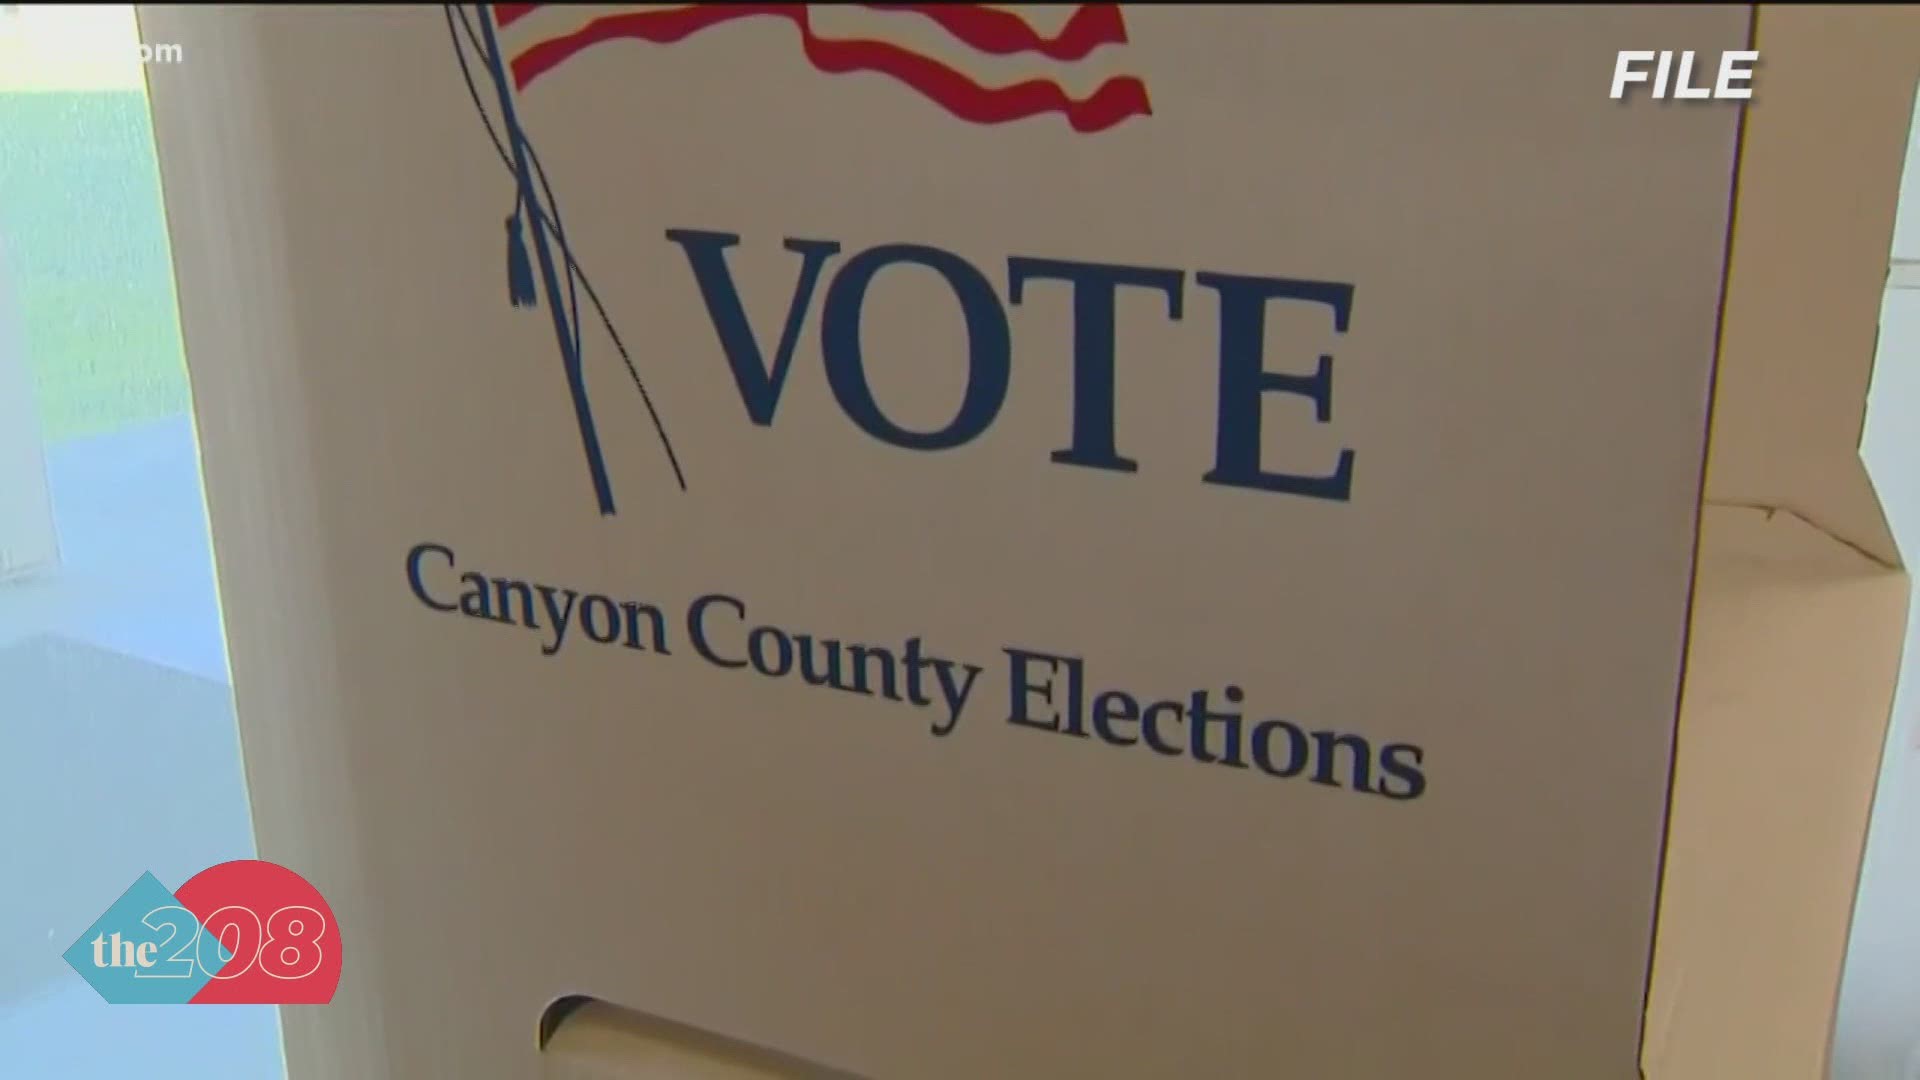 Canyon County Clerk Chris Yamamoto said there will be few voting places than in previous years, but they are hoping most people will vote before Election Day.